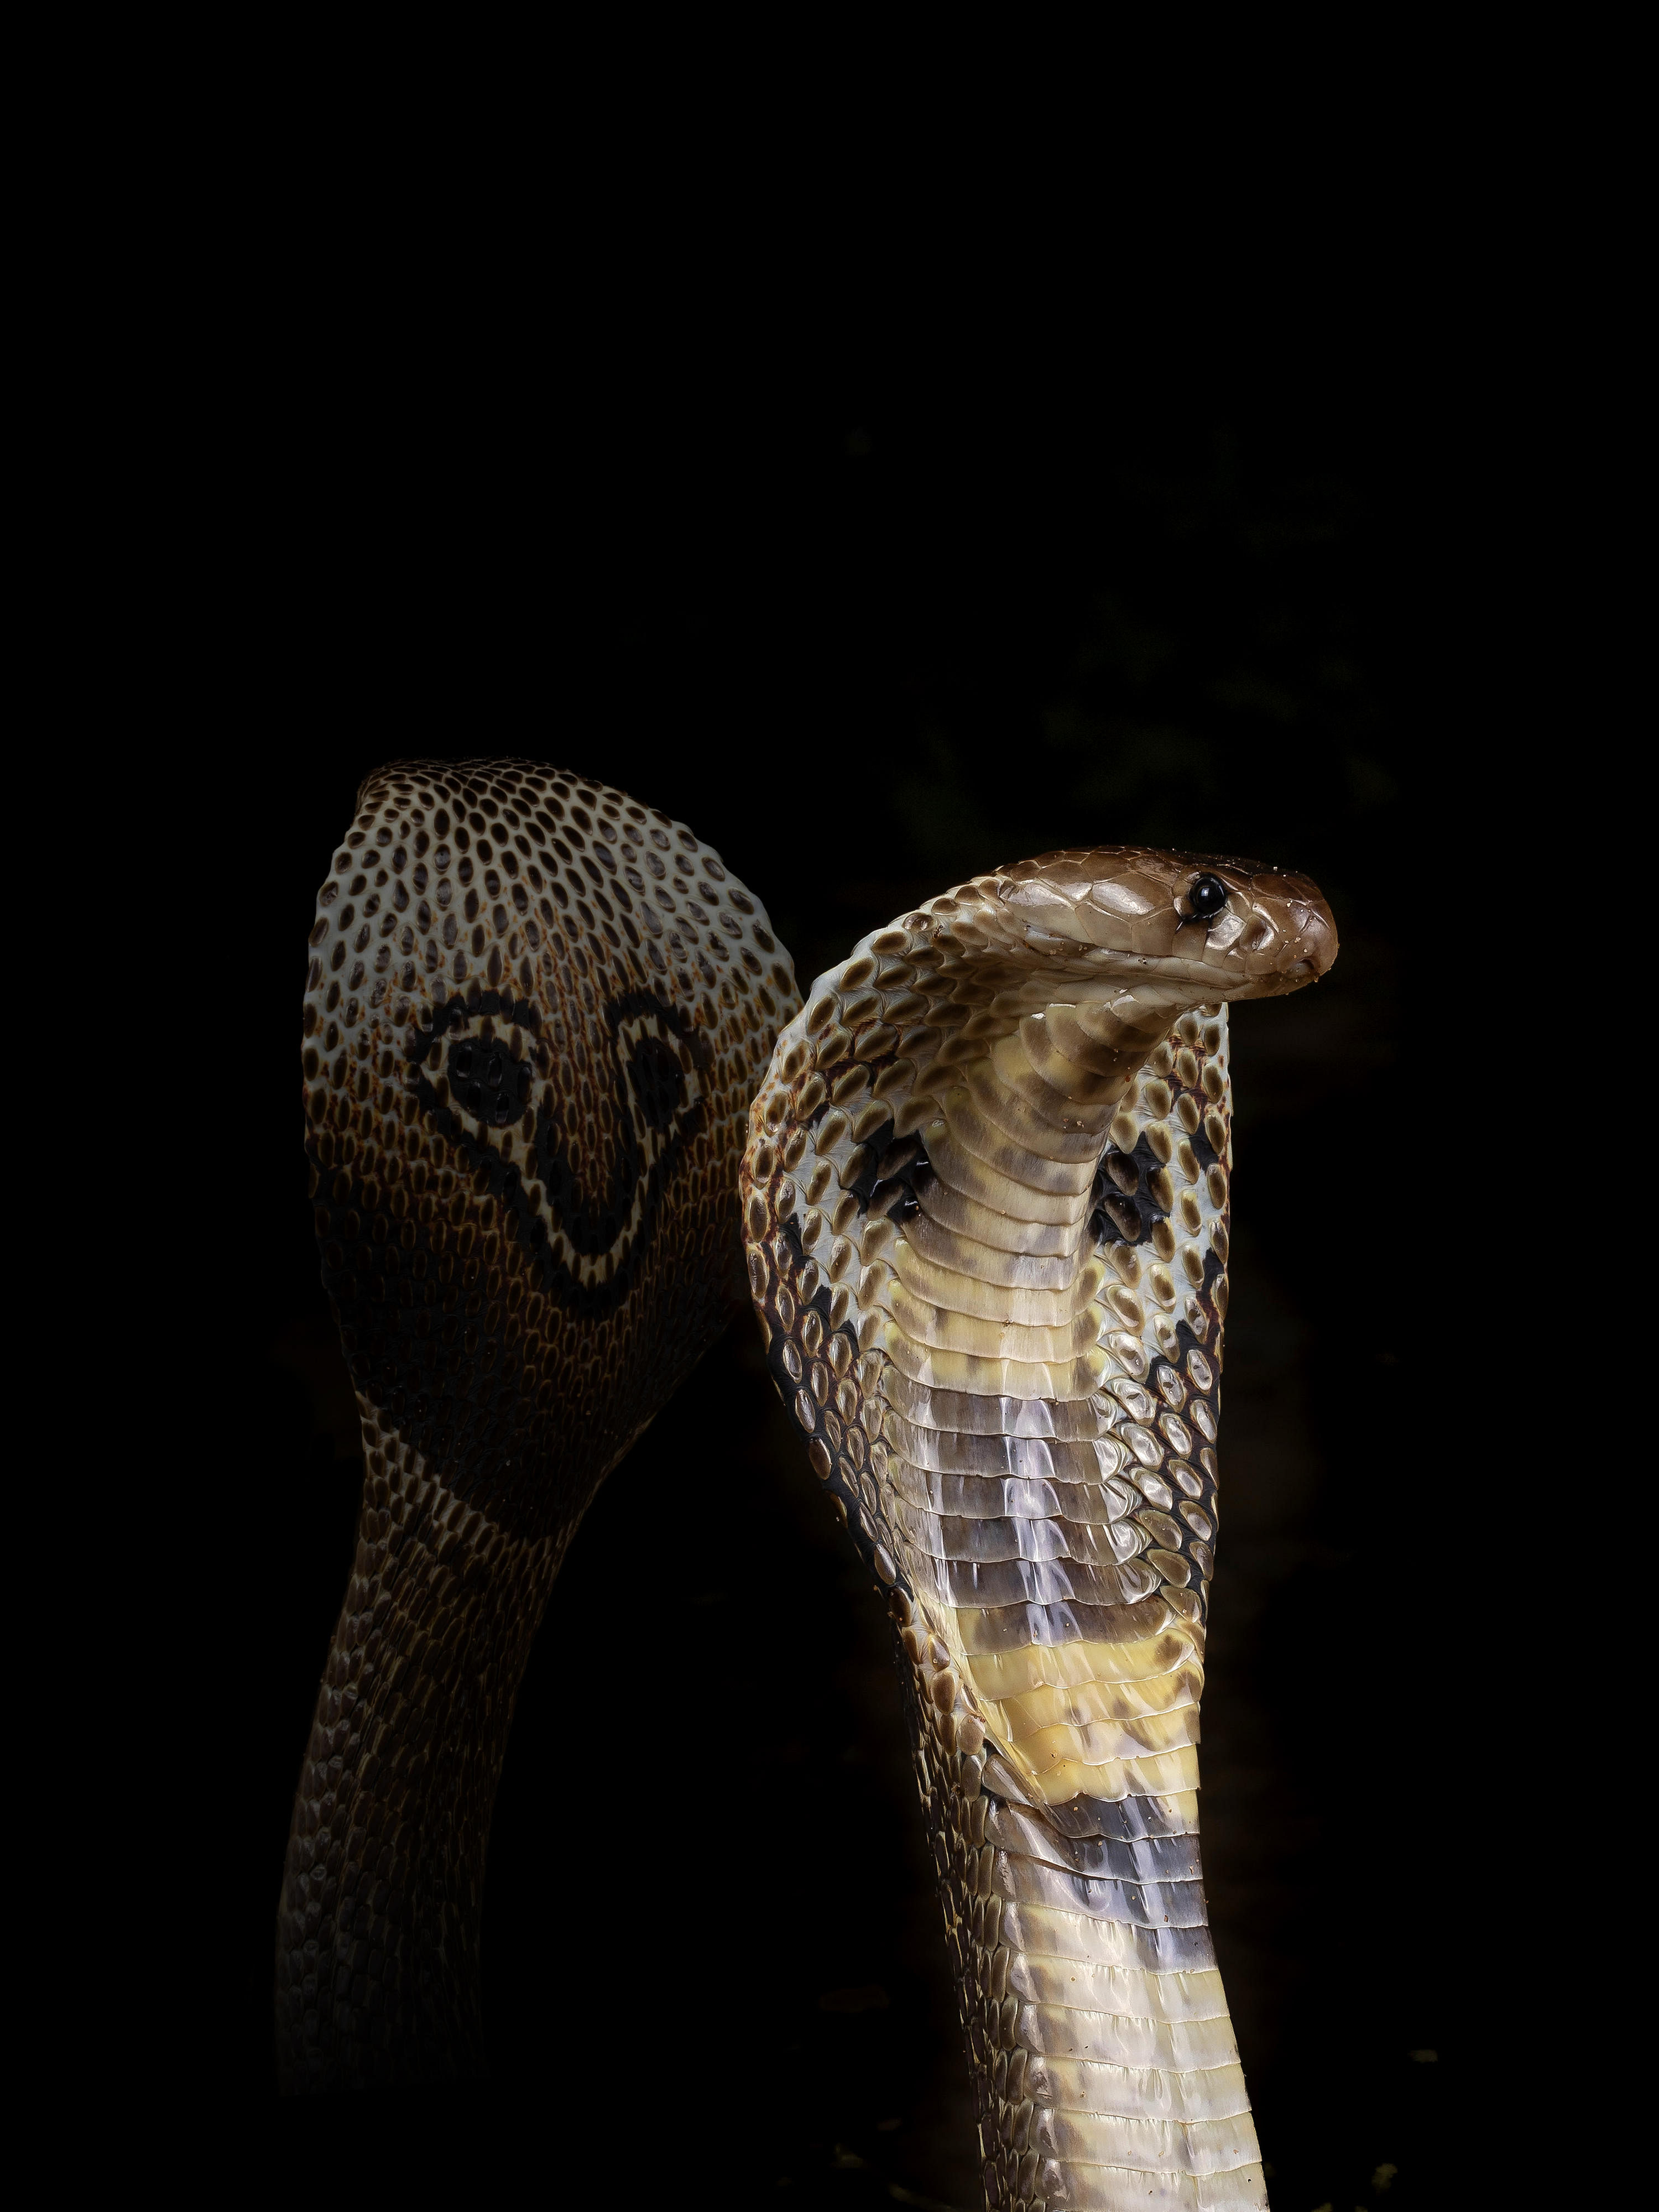 The finding may help save thousands of lives in future as it opens up the doors to create better quality antivenom in the laboratory using recombinant DNA technology.